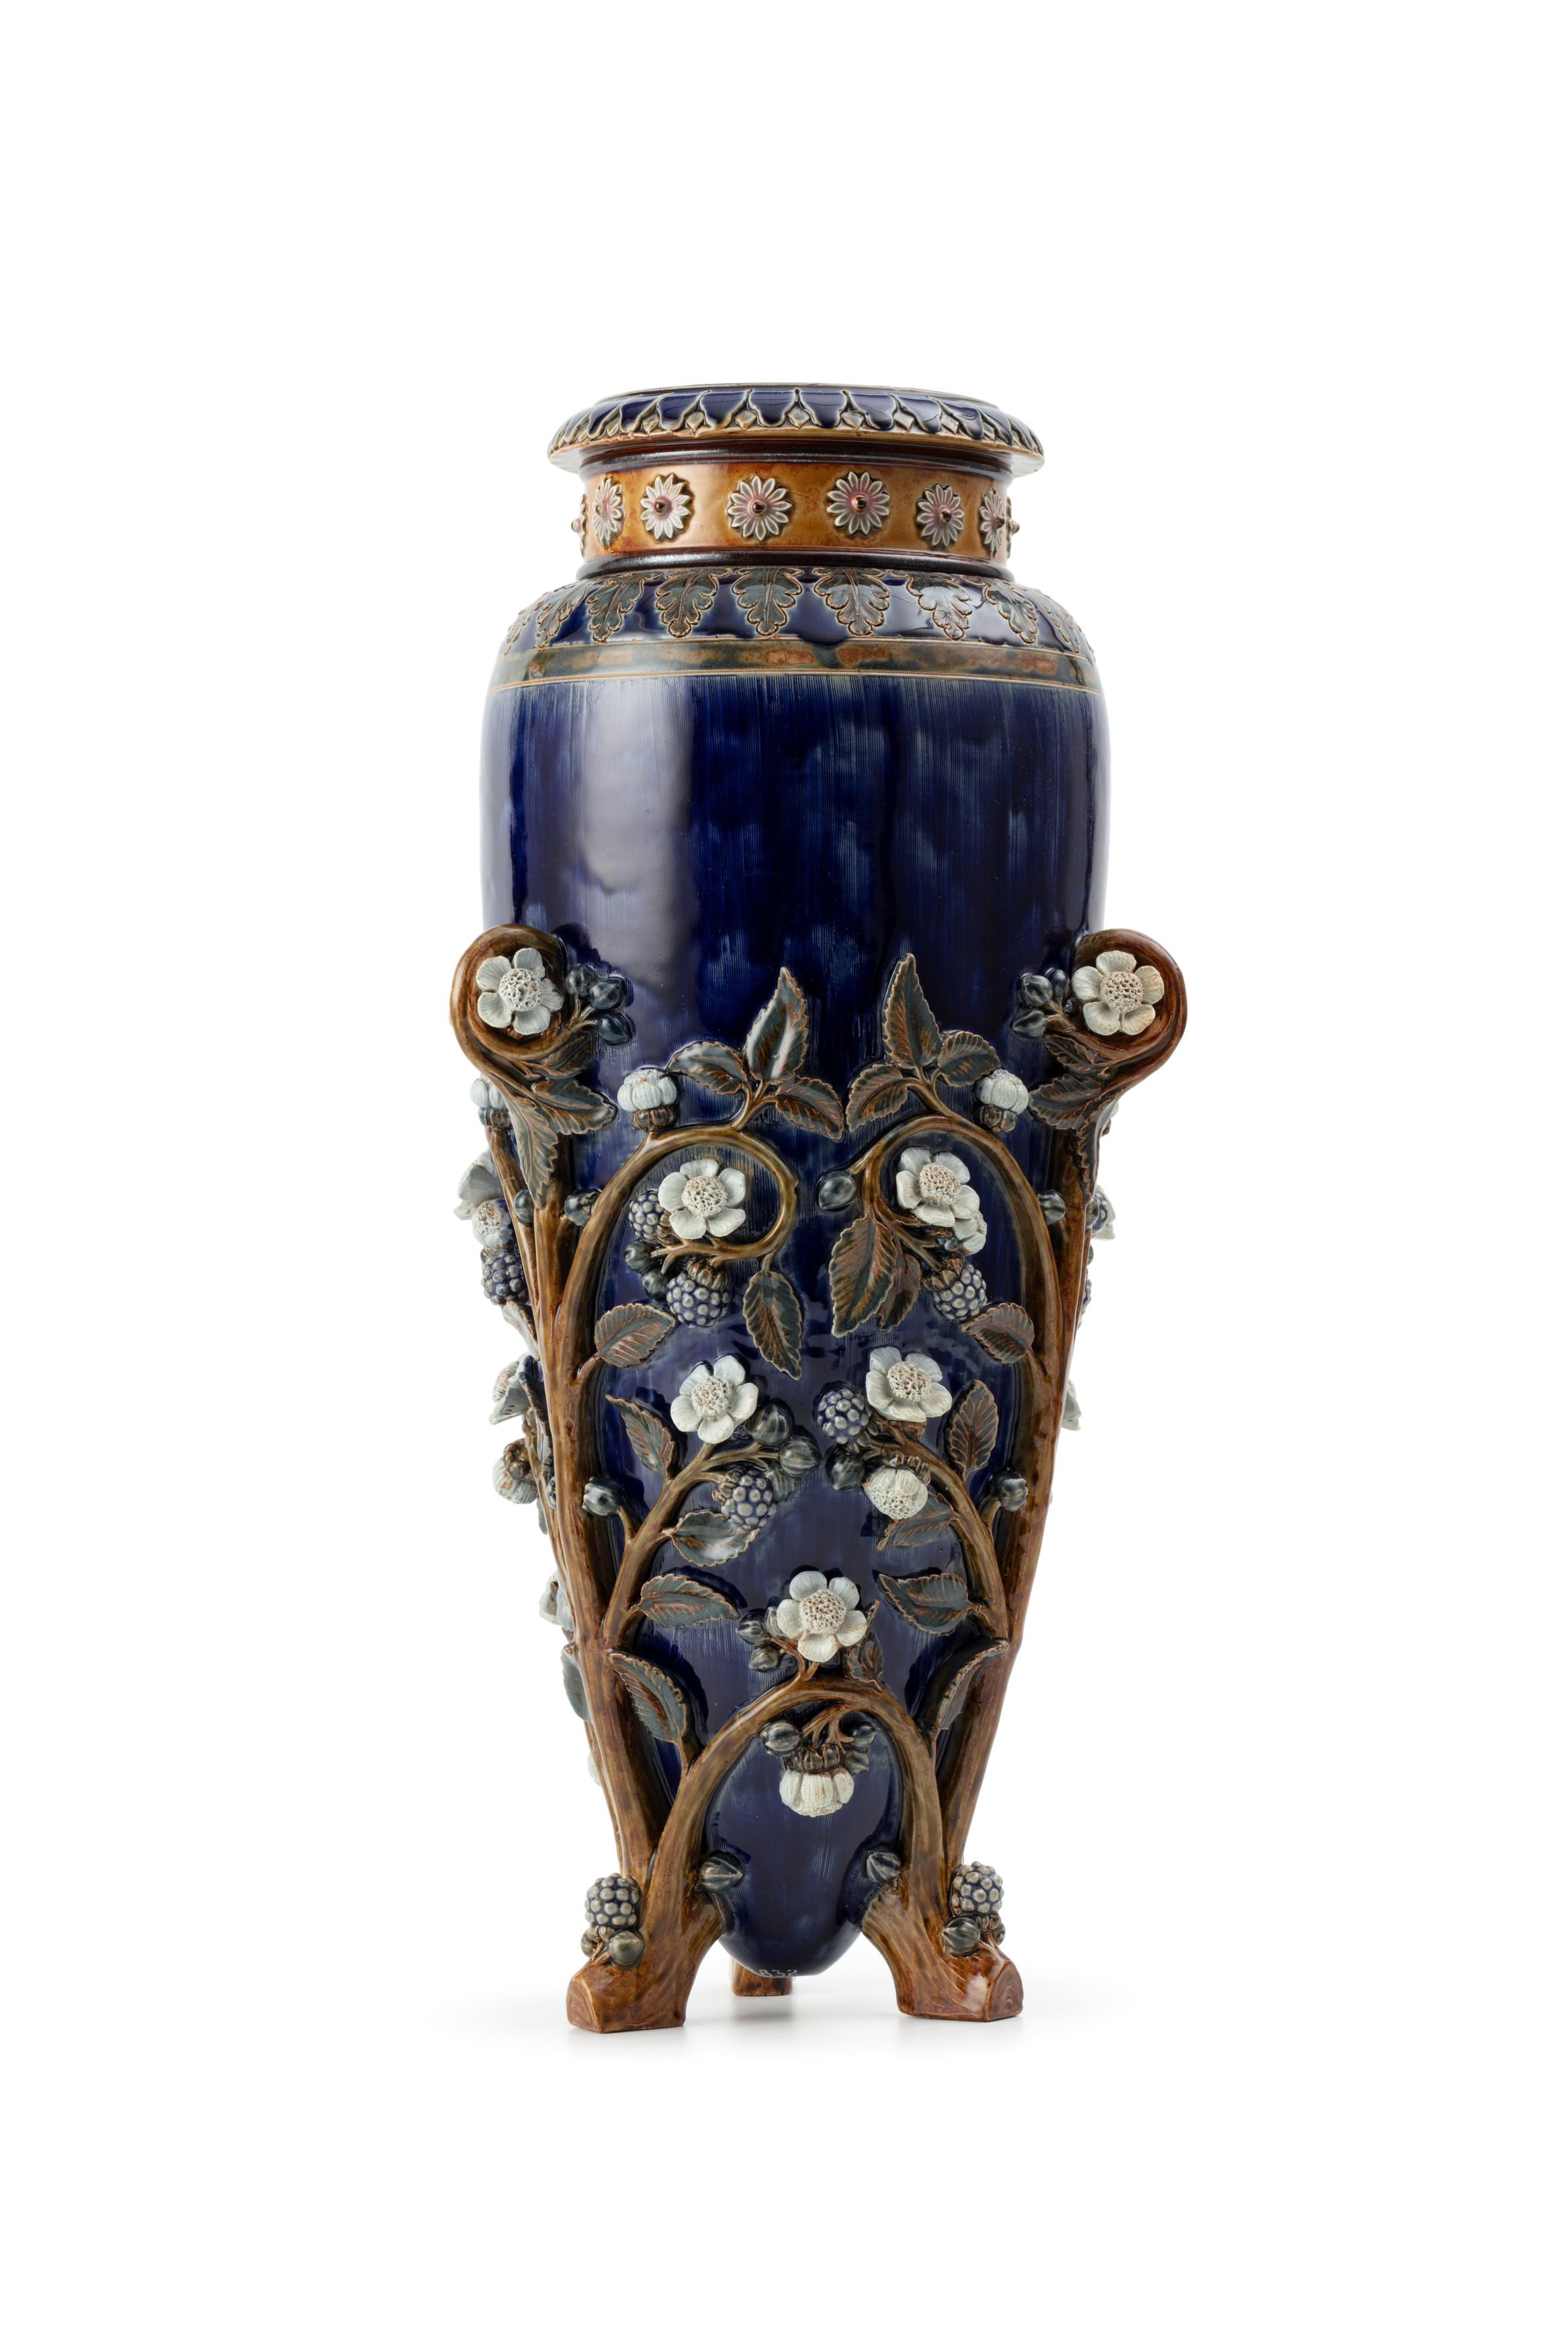 'Blackberries' vase by Doulton and Co